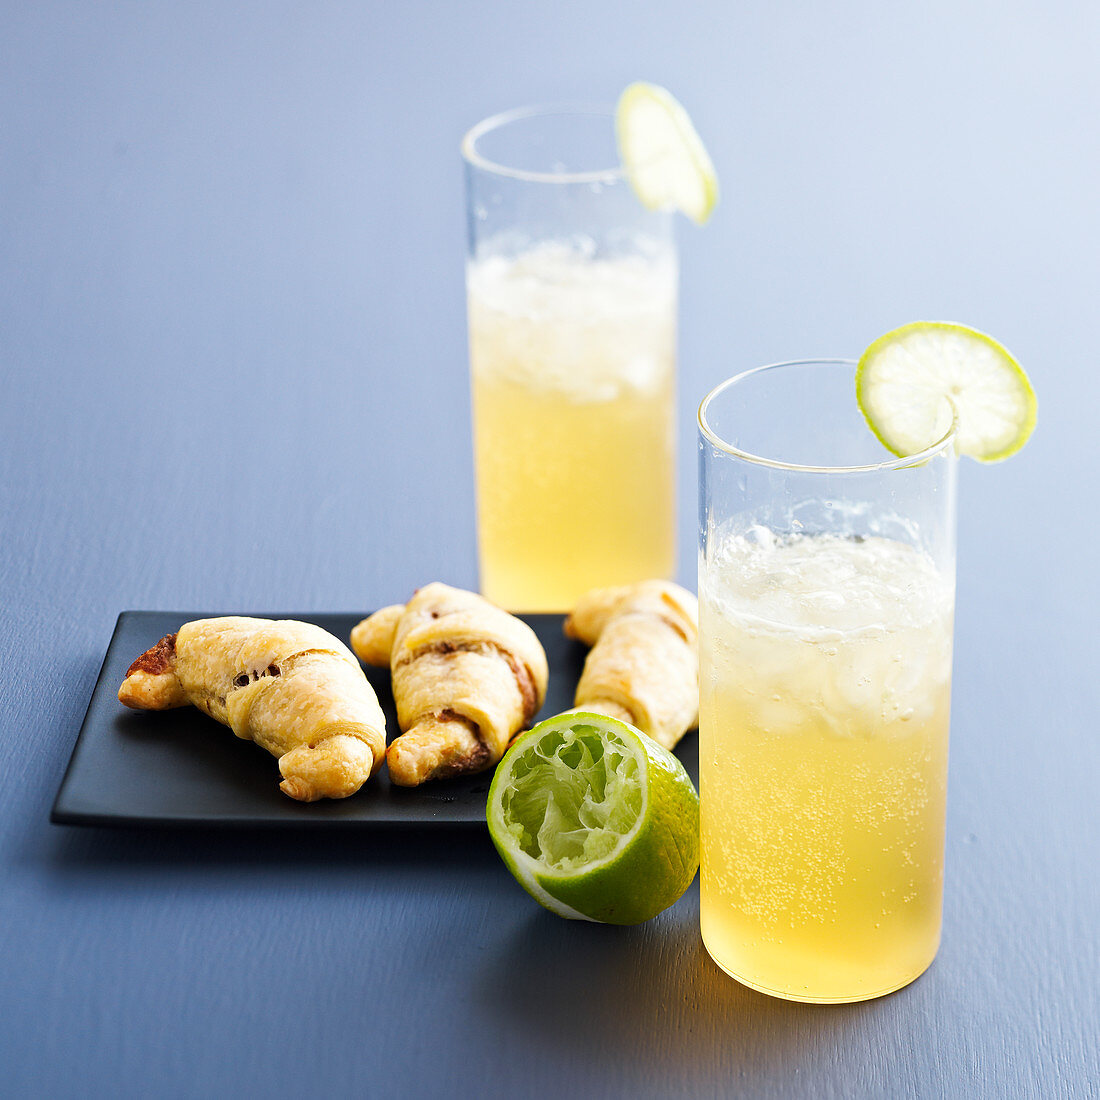 'Iceberg' cocktails with cider, lime and mini croissants as aperitifs